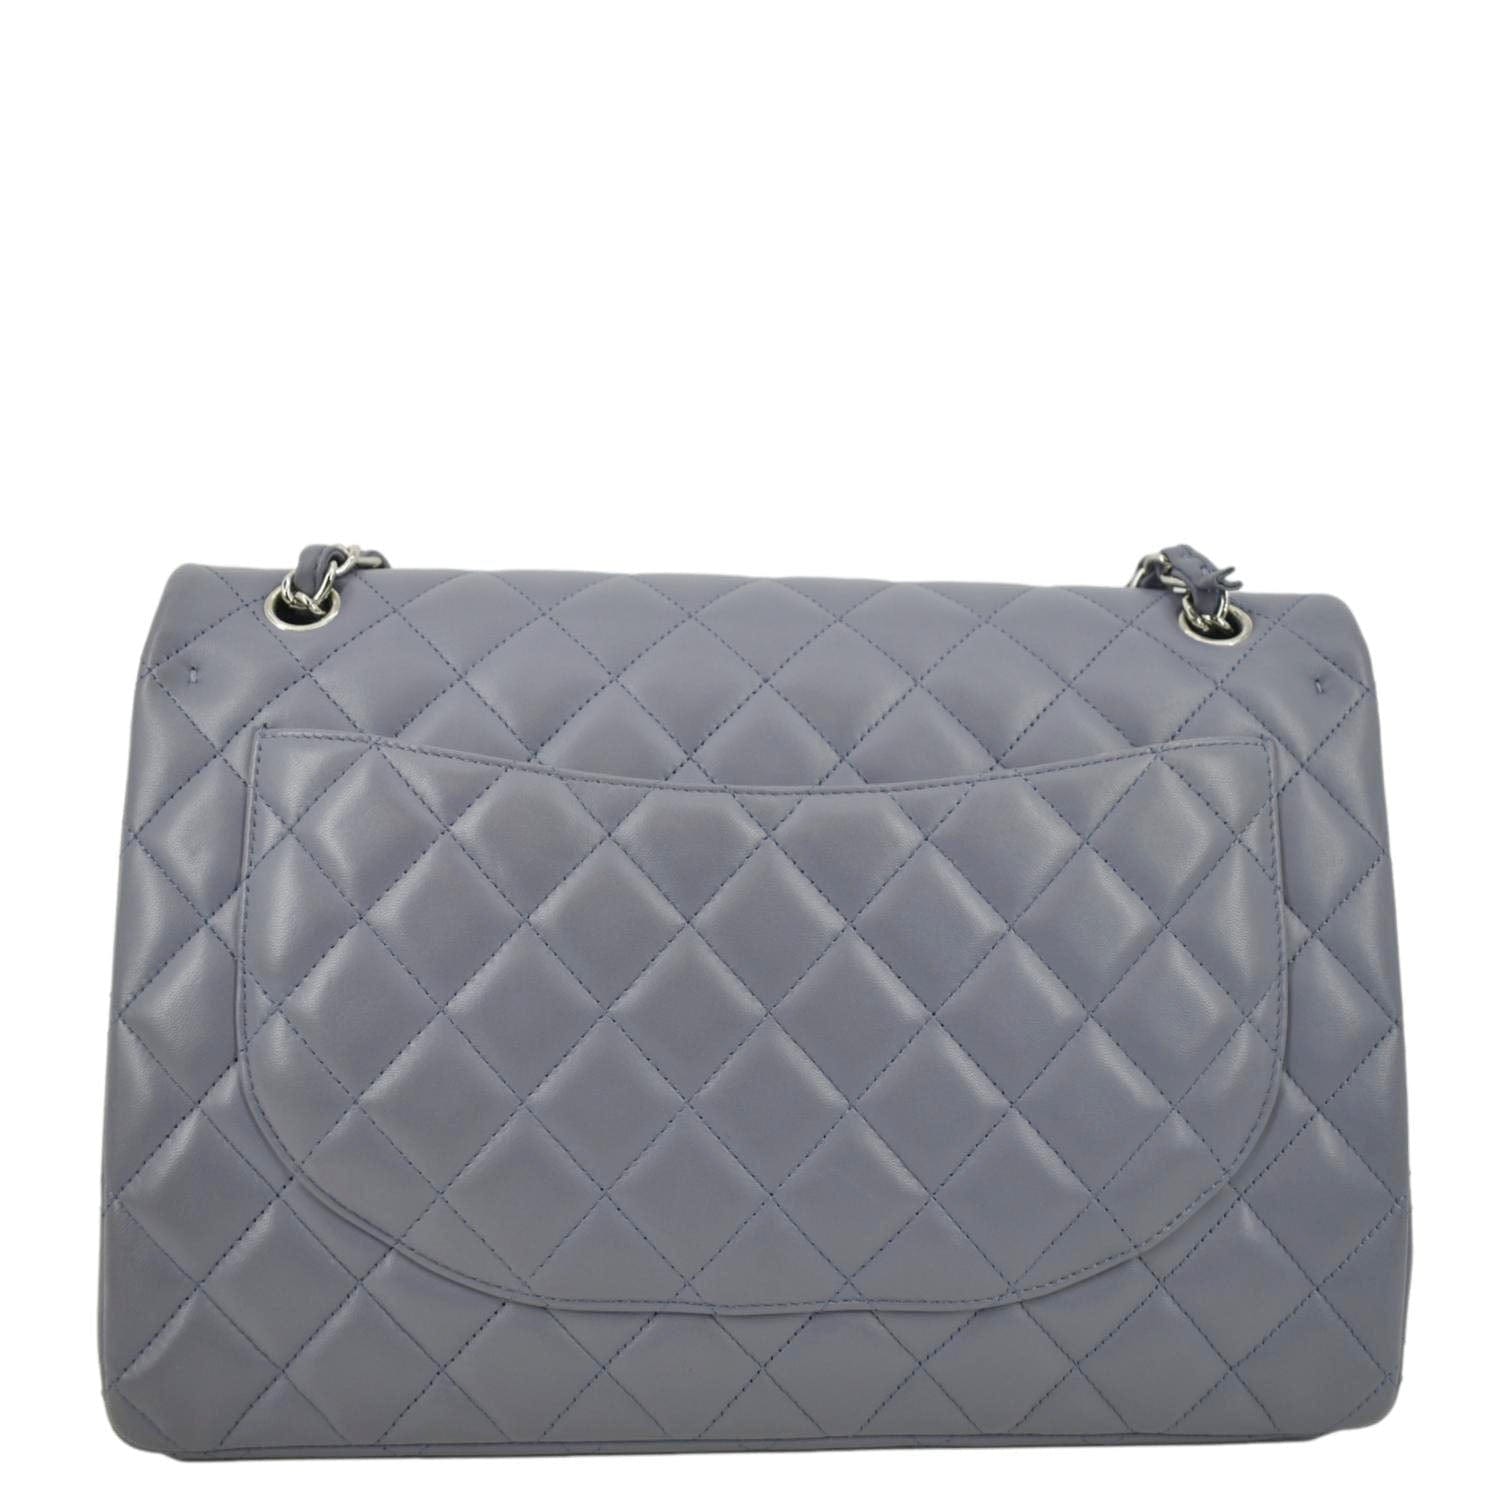 CHANEL Classic Maxi Double Flap Quilted Lambskin Leather Shoulder Bag